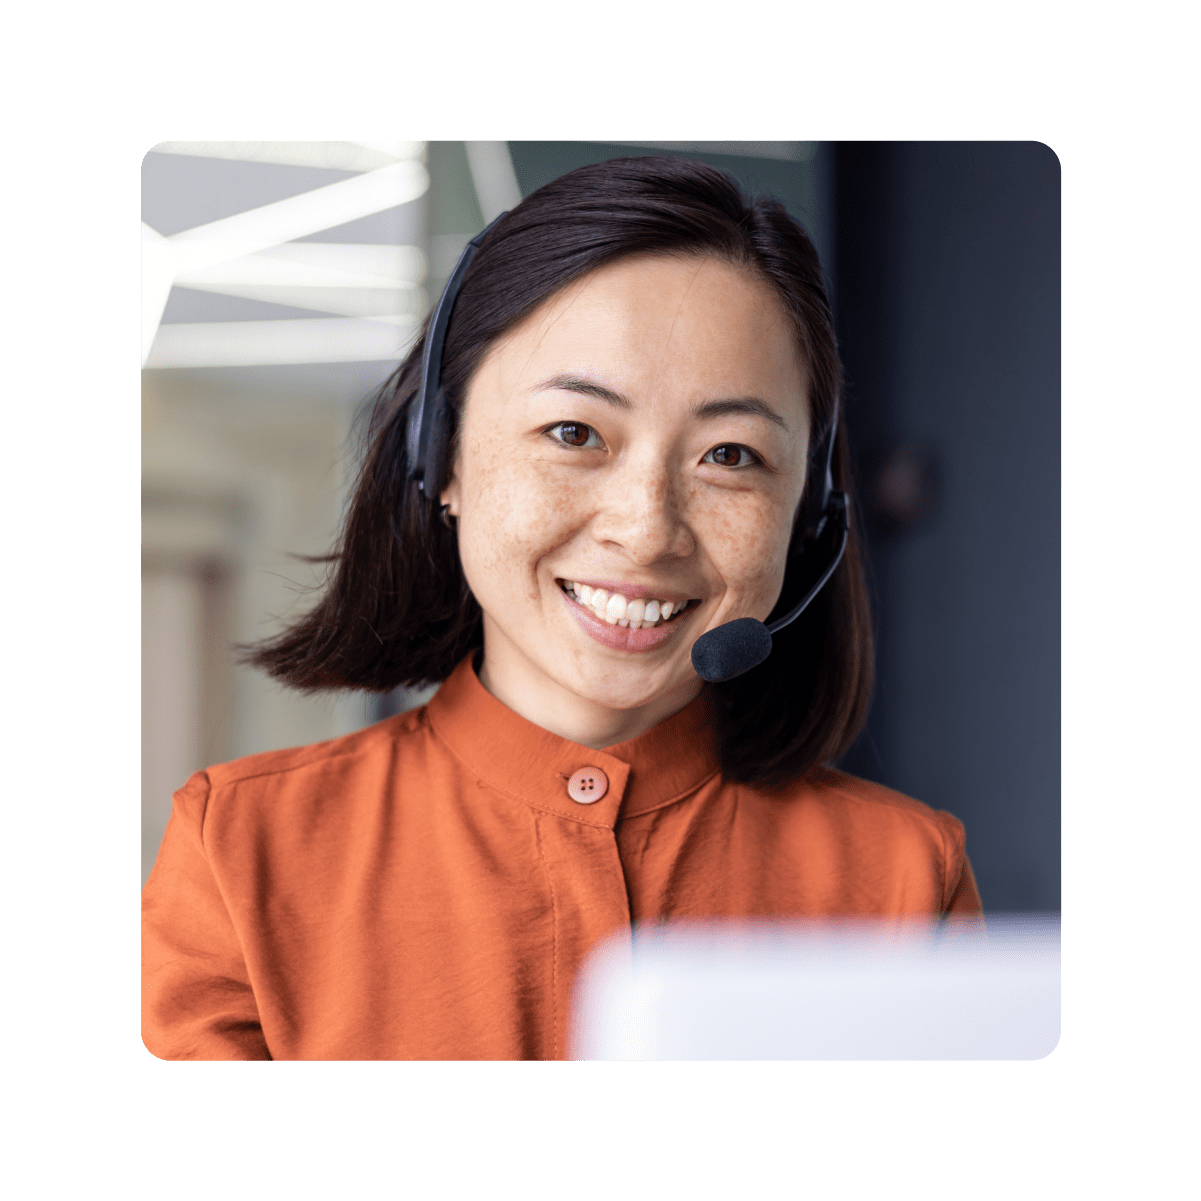 Smiling customer success agent wearing headset